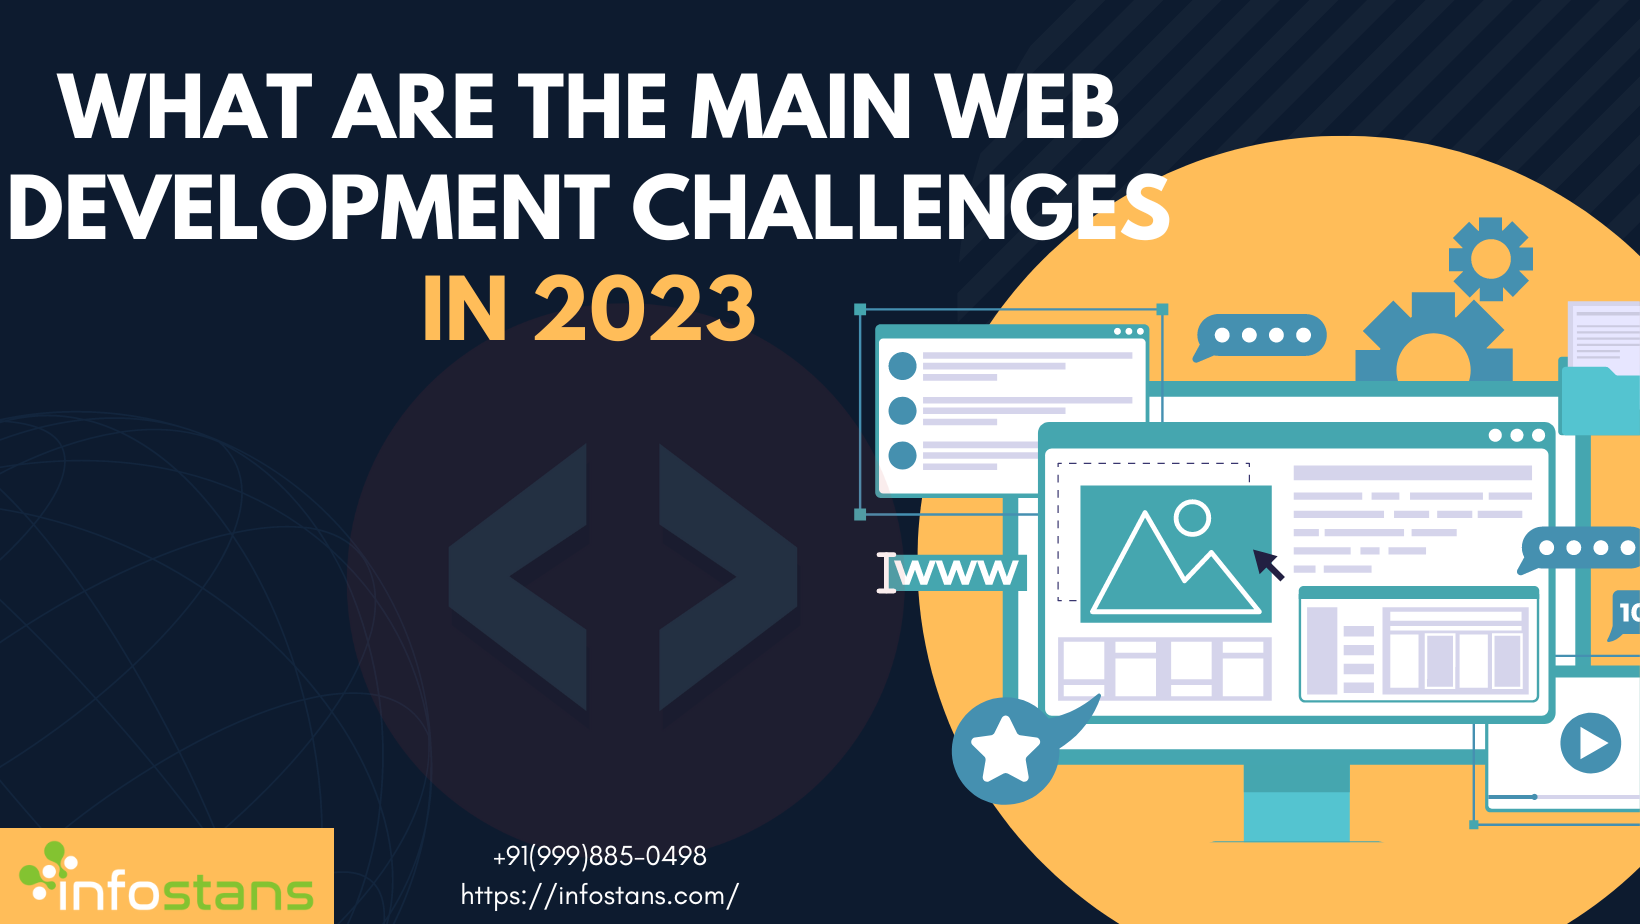 What Are The Main Web Development Challenges in 2023